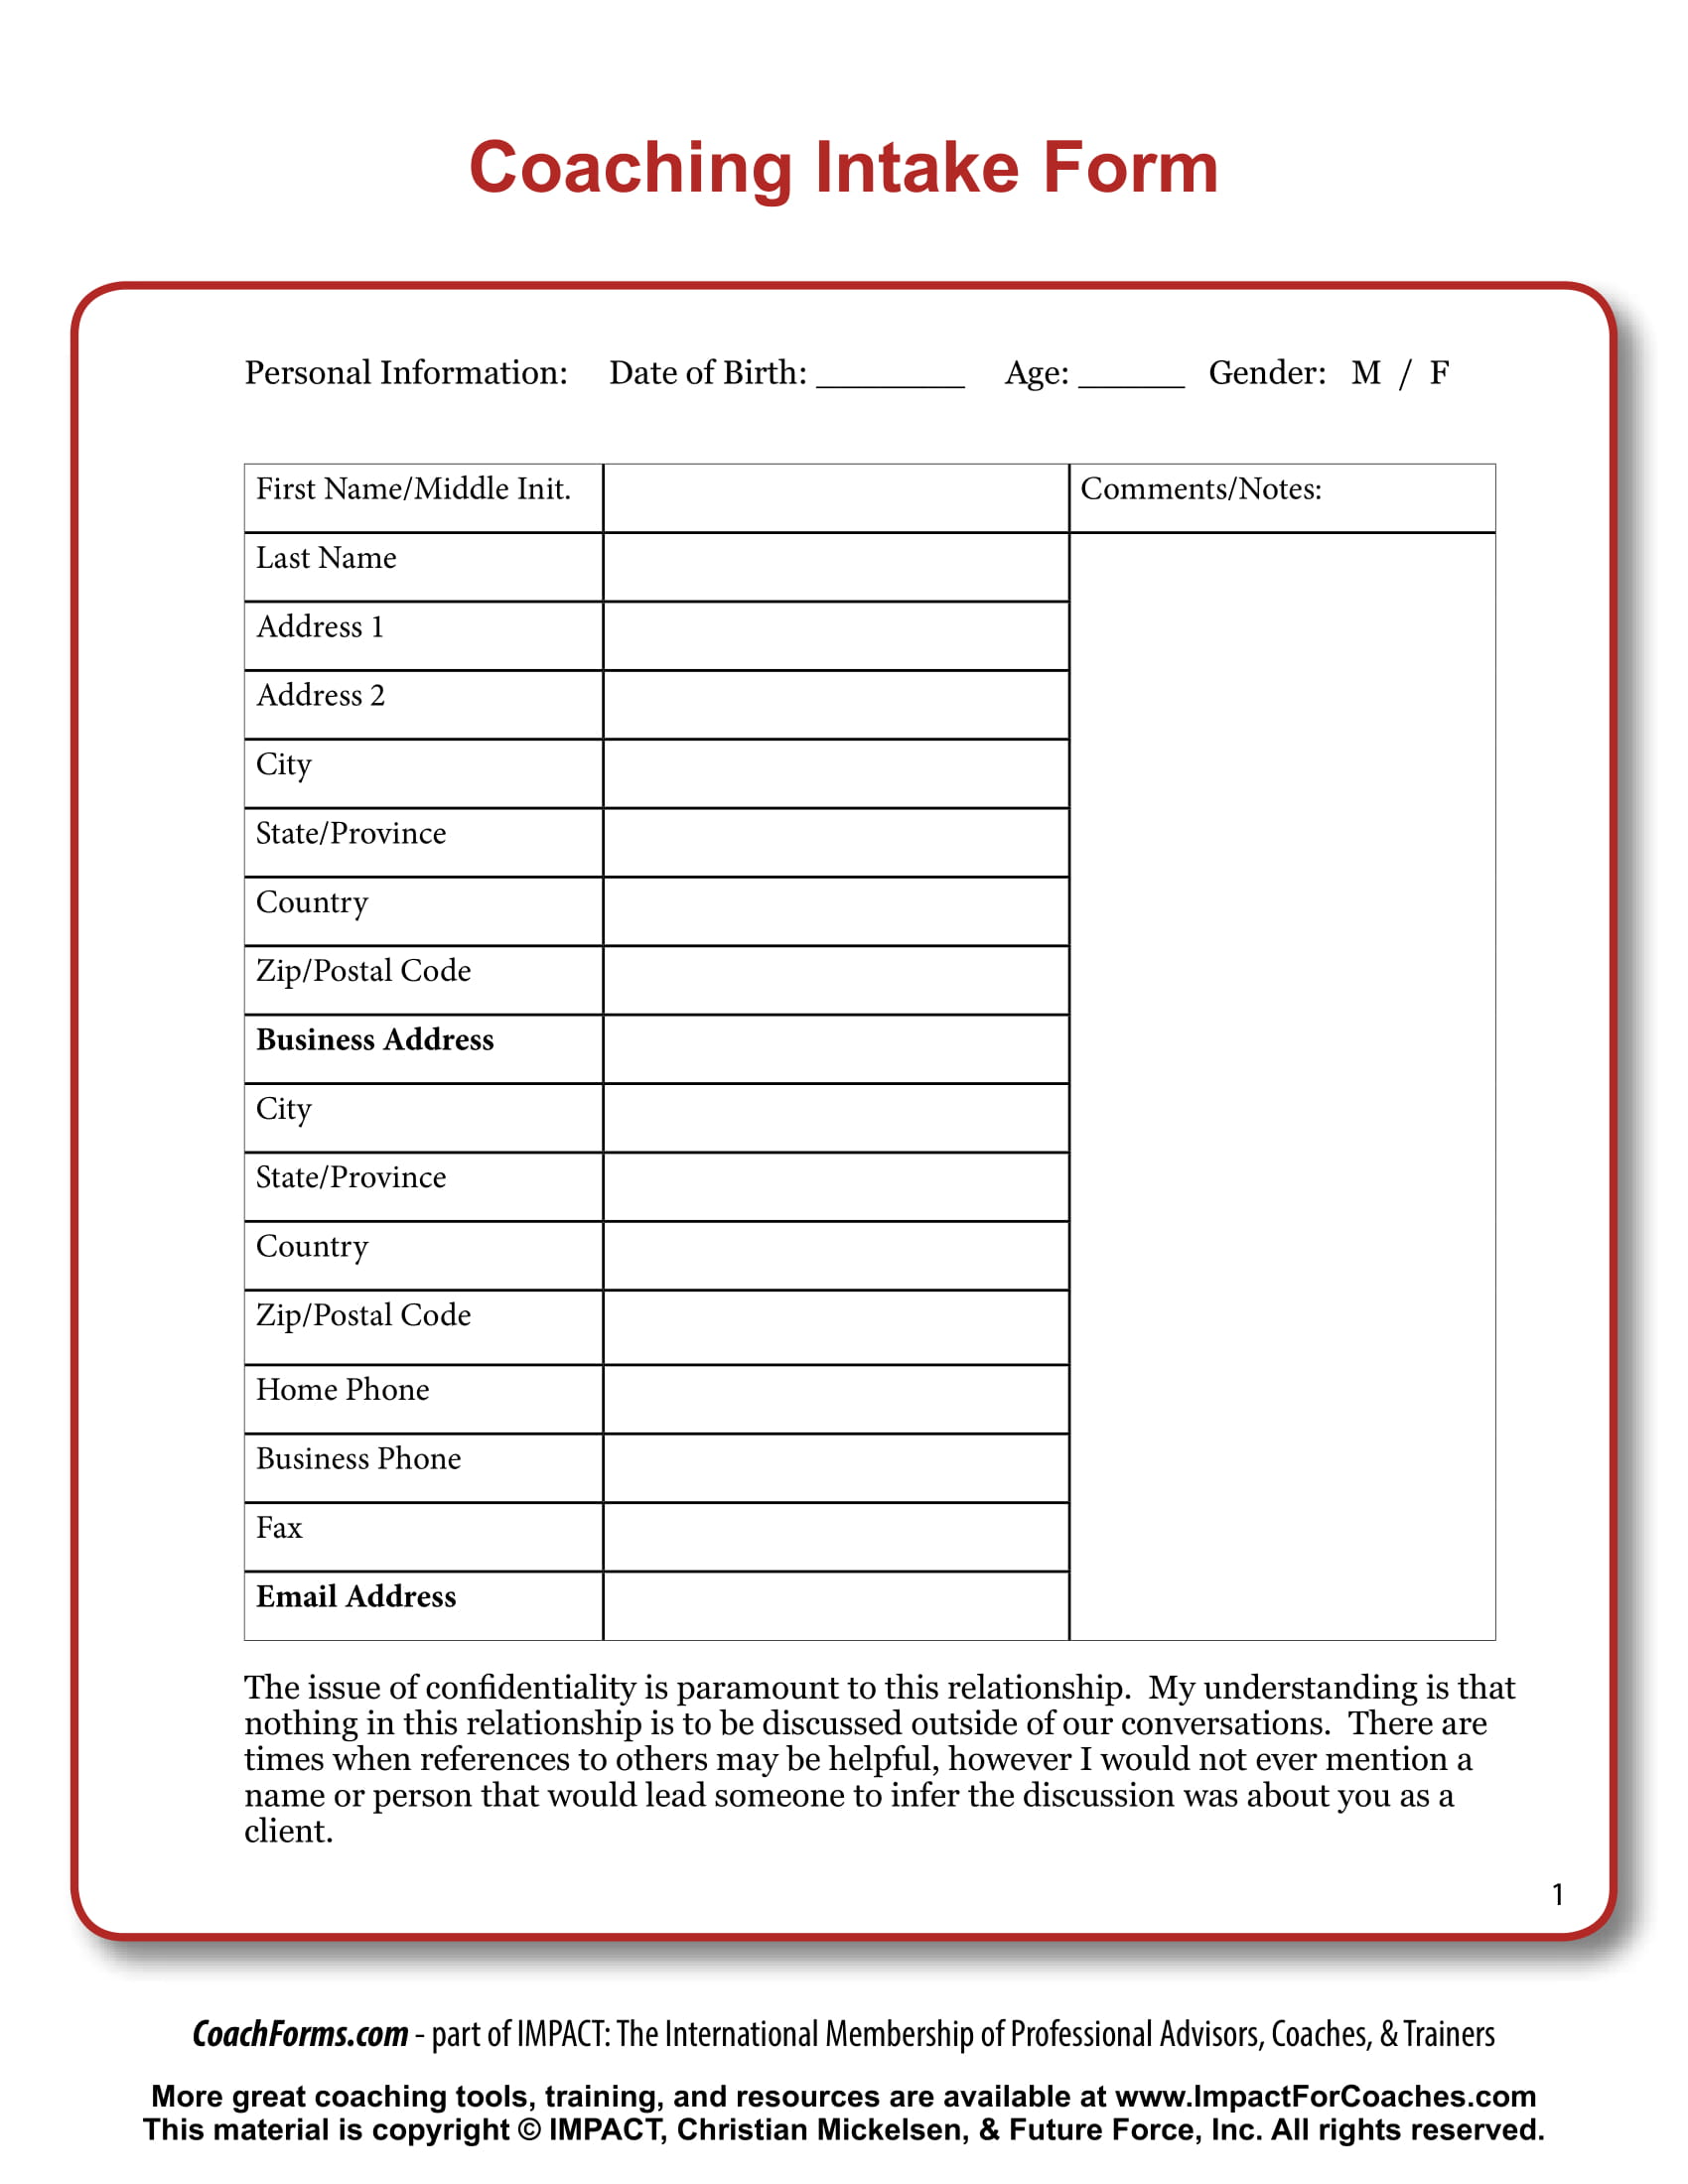 Coaching Intake Form Template Flyer Template